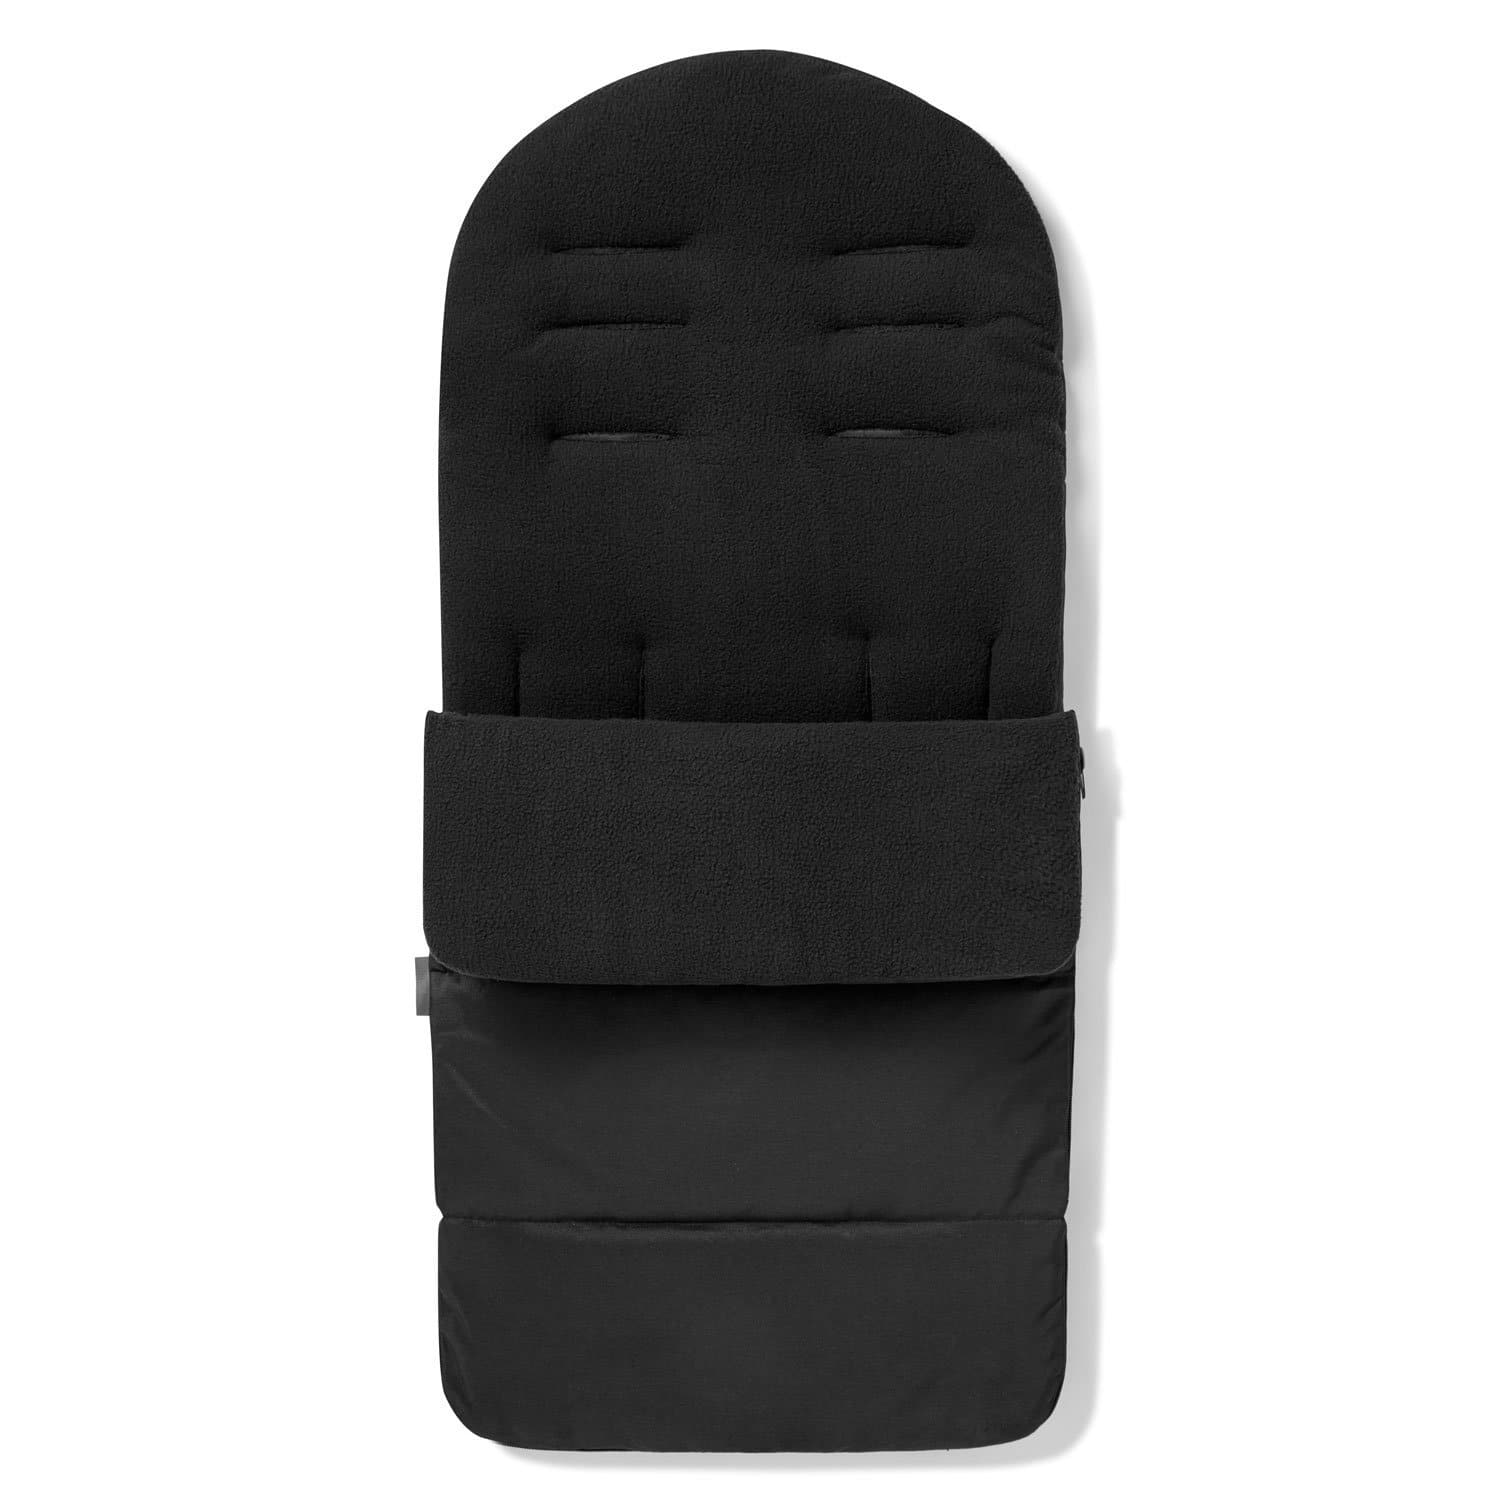 Premium Footmuff / Cosy Toes Compatible with Unilove - Black Jack / Fits All Models | For Your Little One